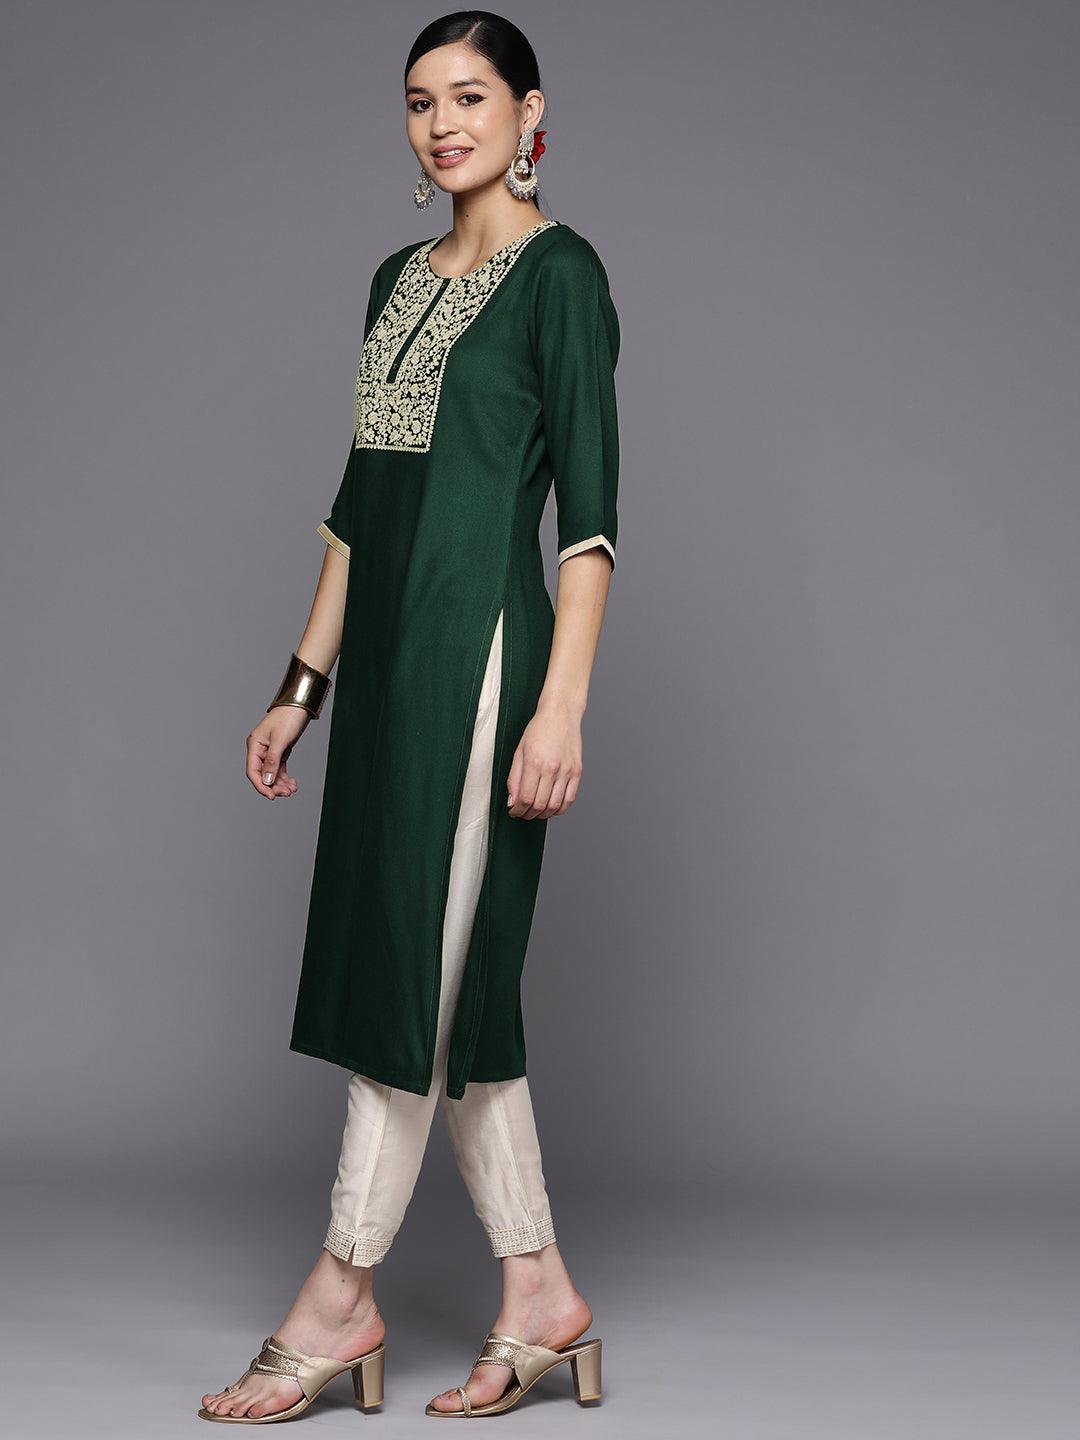 Lirath woman Fashion Women Solid Straight Kurta - Buy Lirath woman Fashion  Women Solid Straight Kurta Online at Best Prices in India | Flipkart.com